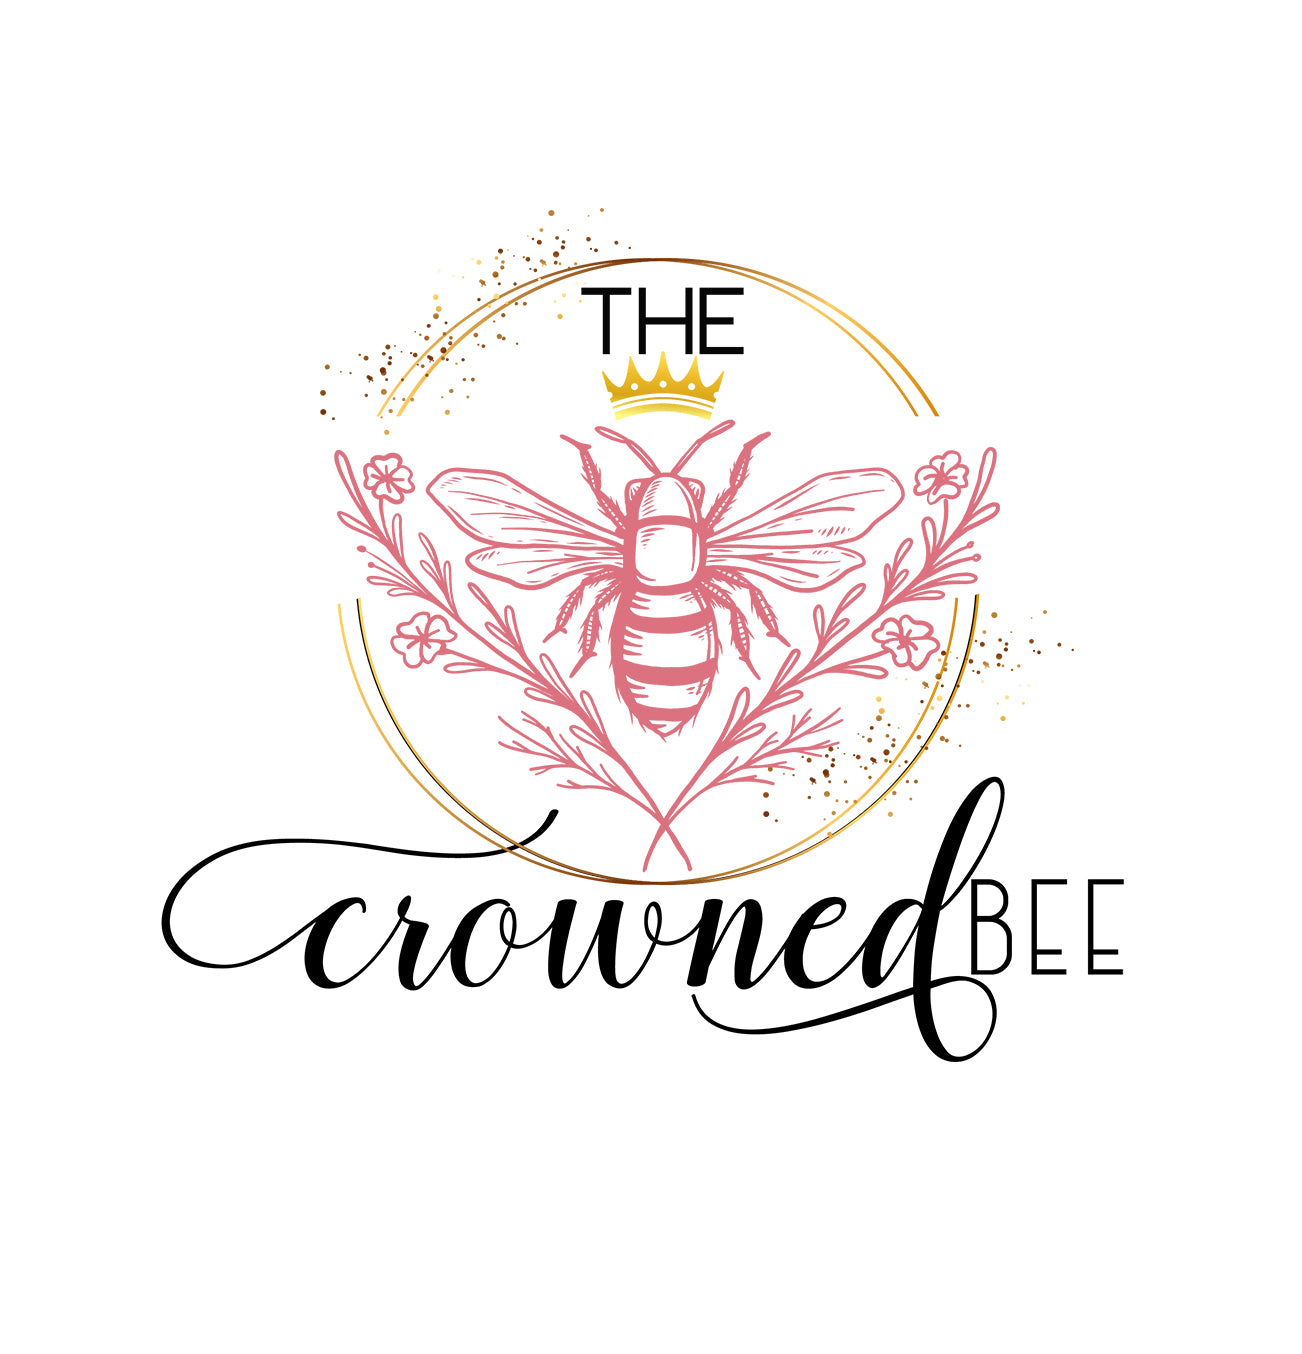 The Crowned Bee